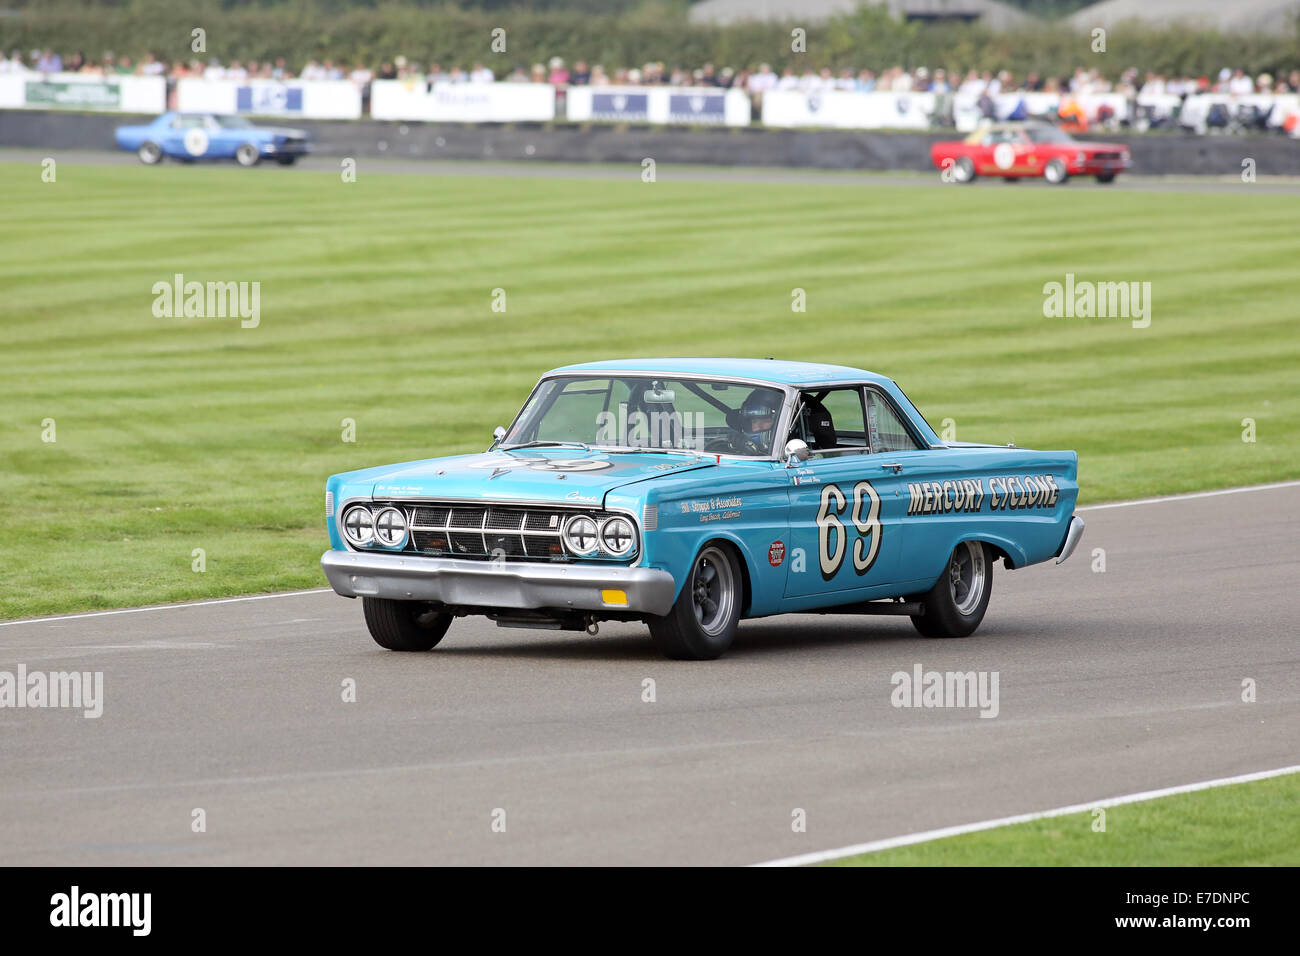 Chichester, West Sussex, UK. 13th Sep, 2014. Pictures from the Goodwood Revival 2014 - The Shelby Cup - A race for saloon cars powered by small-block V8 engines on the 60th anniversary of the small-block V8 engine. A large number of Ford Mustangs mariking the car's 50th anniversary took on other American classics such as Ford Falcon, Plymouth Barracuda, Mercury Comet Cyclone and Dodge Dart. Picture shows: Roger Wills driving a 1964 Mercury Comet Cyclone Credit:  Oliver Dixon/Alamy Live News Stock Photo